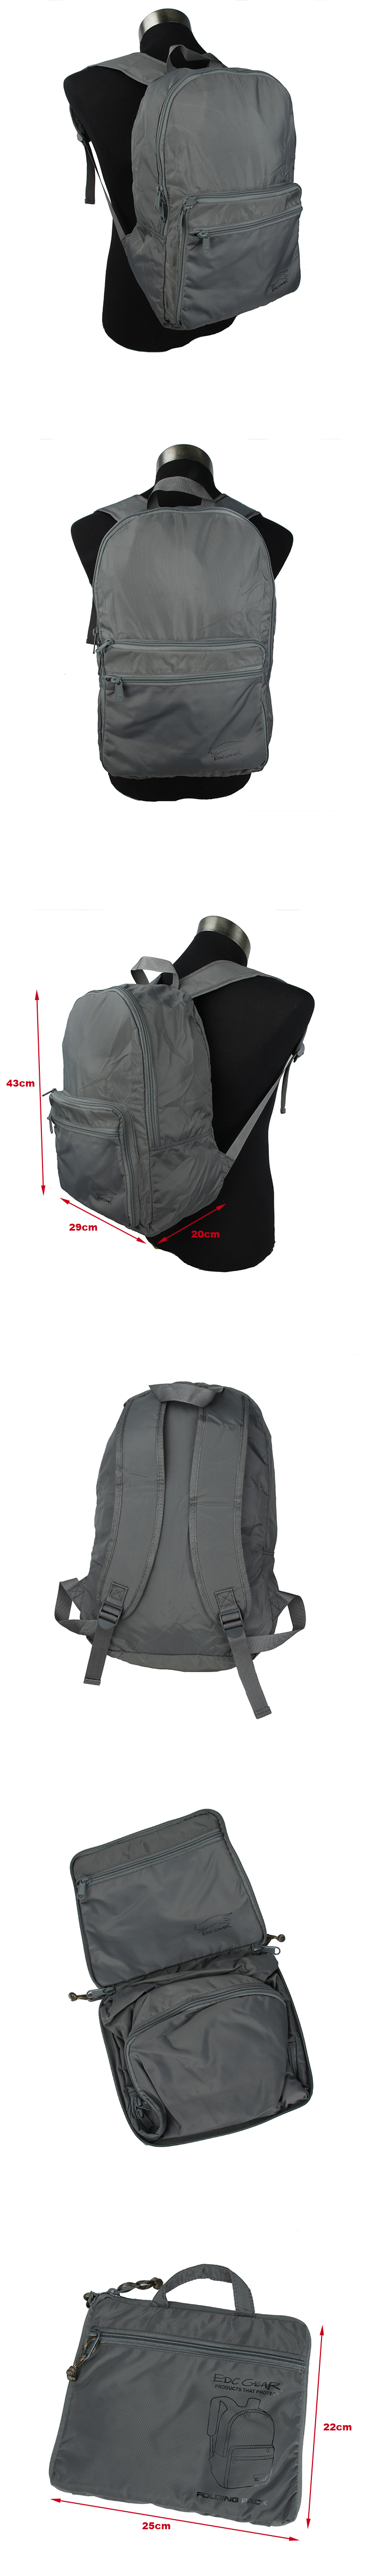 EDC Gear Foldable Travelling Urban Backpack